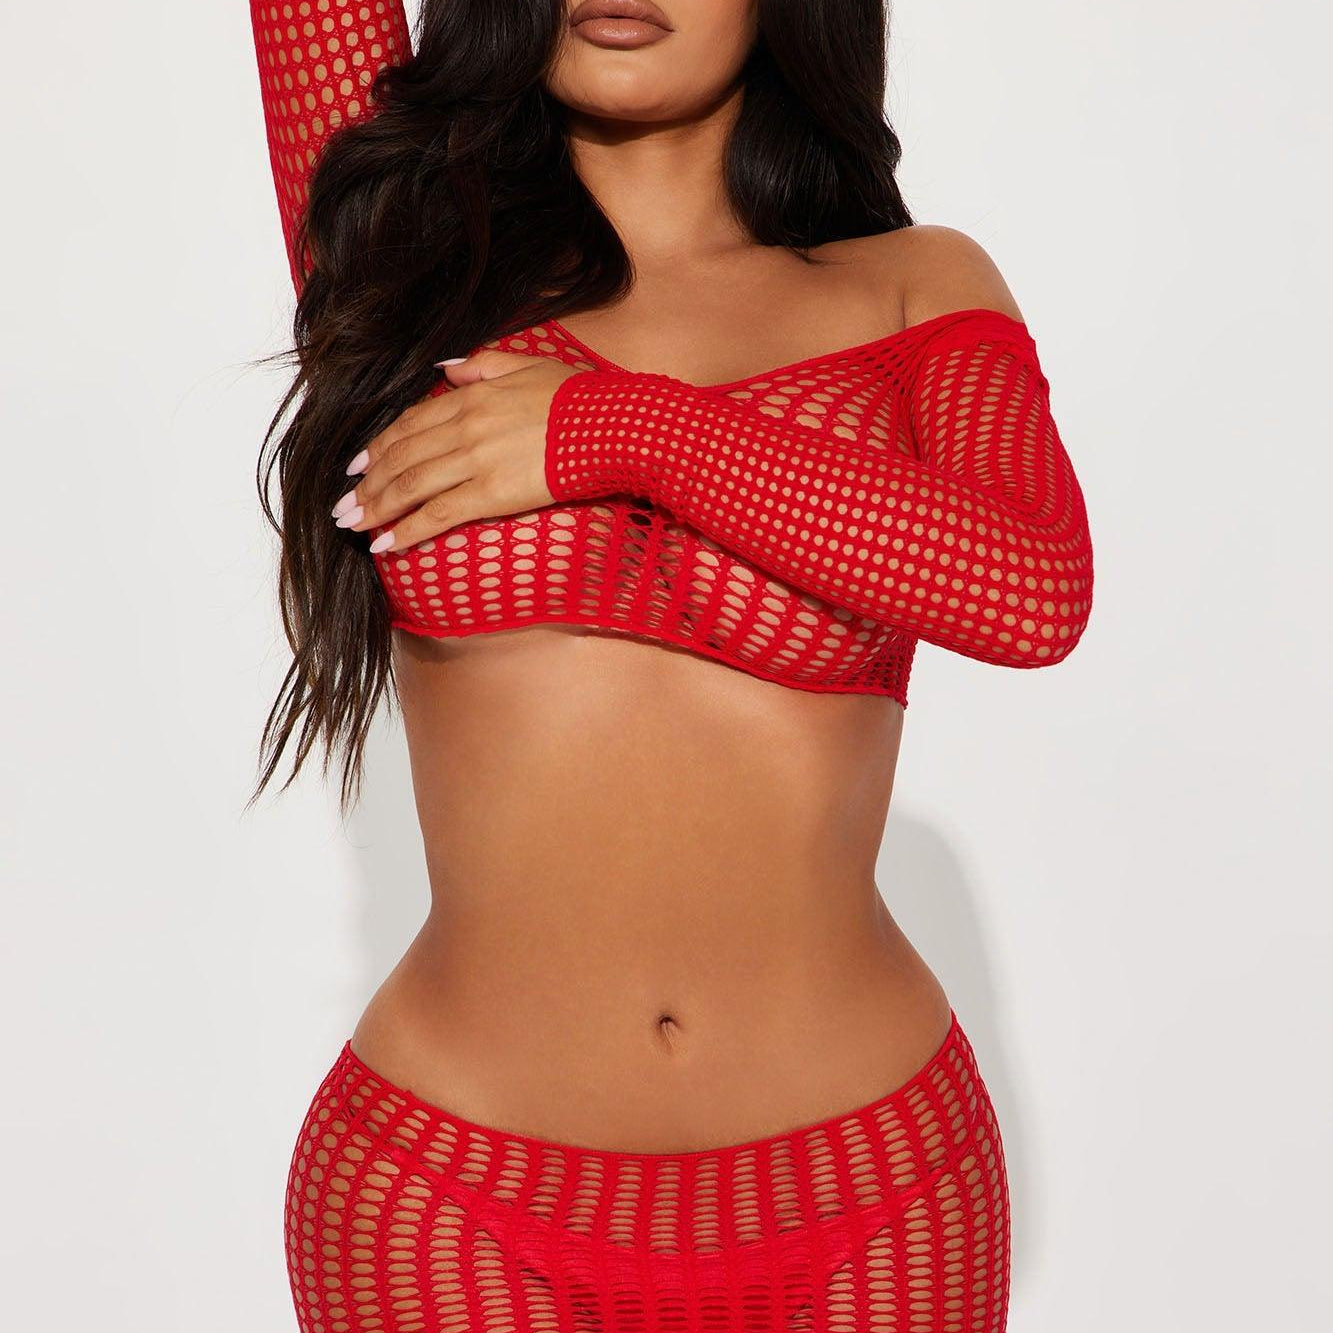 Women's Lingerie Sets I Just Wanna Be Yours Bodystocking 2 Piece Set - Red, Black, White